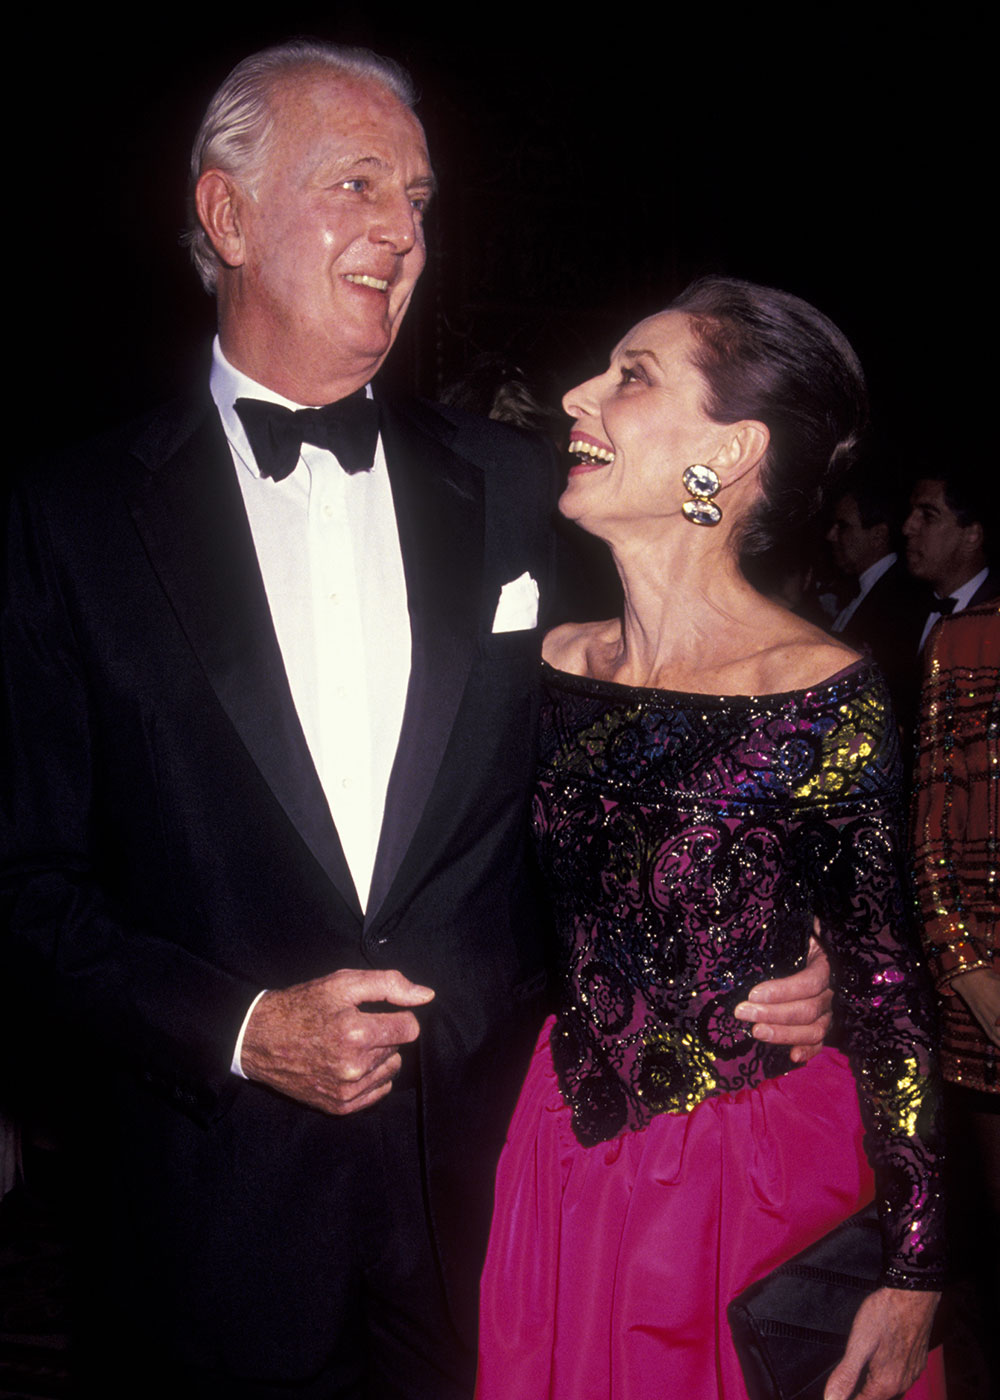 Audrey and Givenchy attend the Eighth Annual Night of Stars Fashion Gala at the Waldorf Hotel in New York City, 1991.